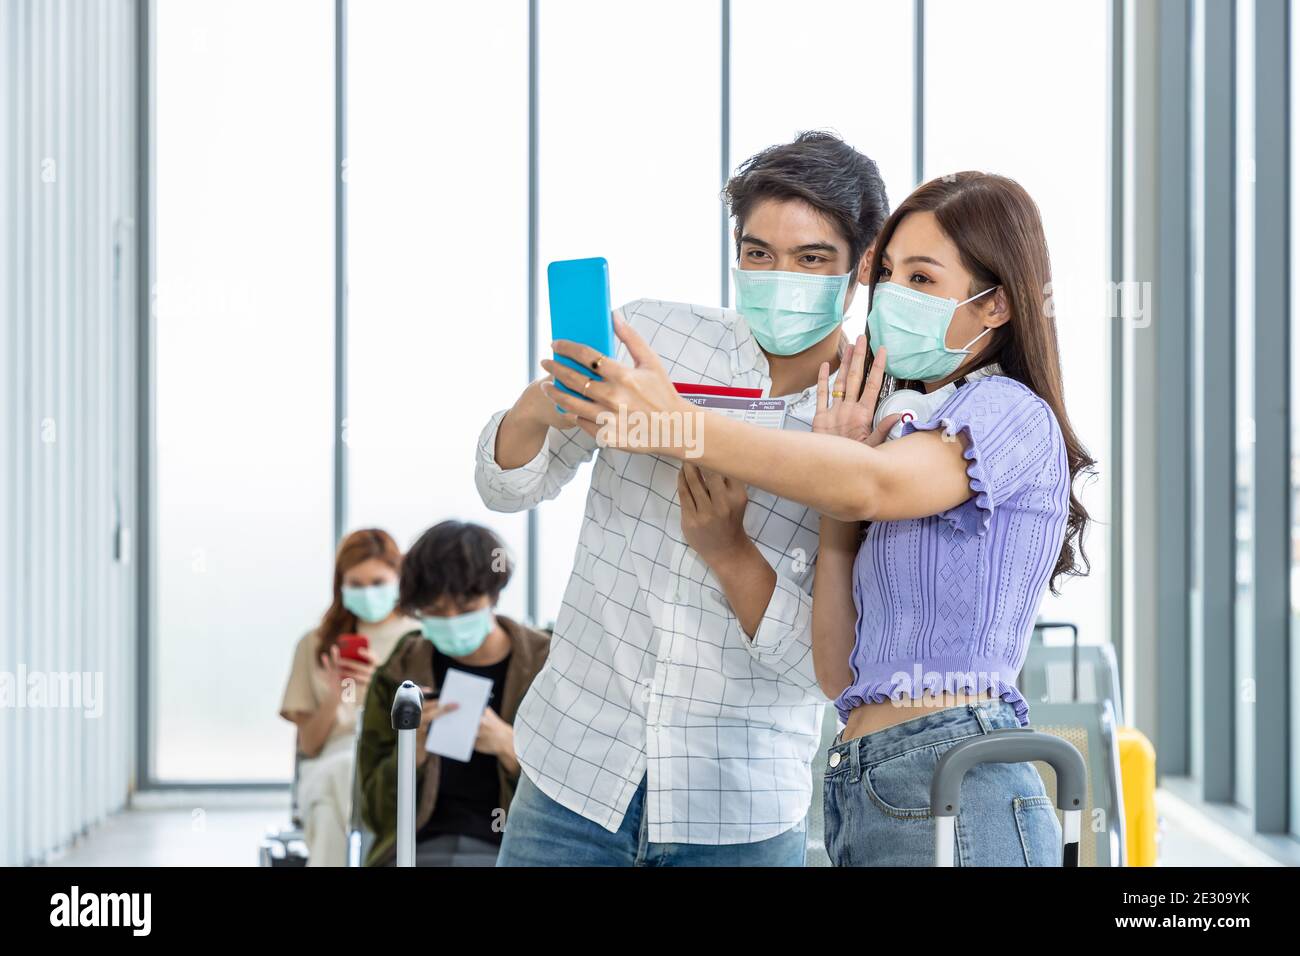 Couple travelers wearing protective mask in airport, during Covid-19 pandemic, with social distancing protocol. Taking photo and selfie before, prepar Stock Photo